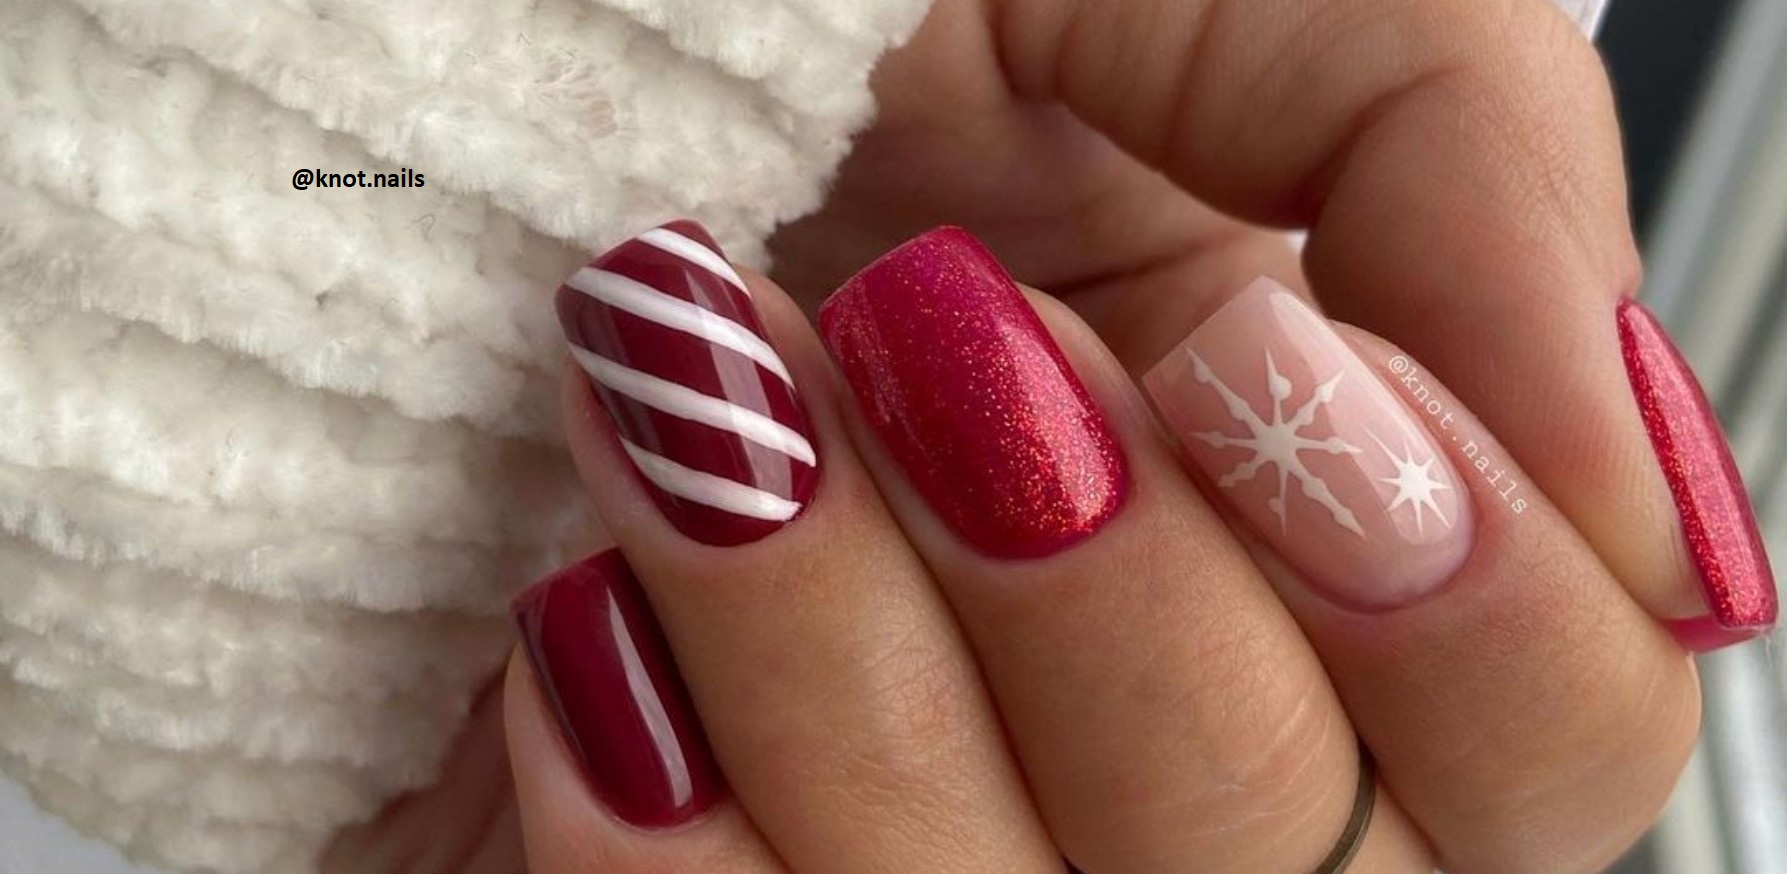 The Biggest Nail Trends This Winter Include Ice Nail Art And Christmas Manis